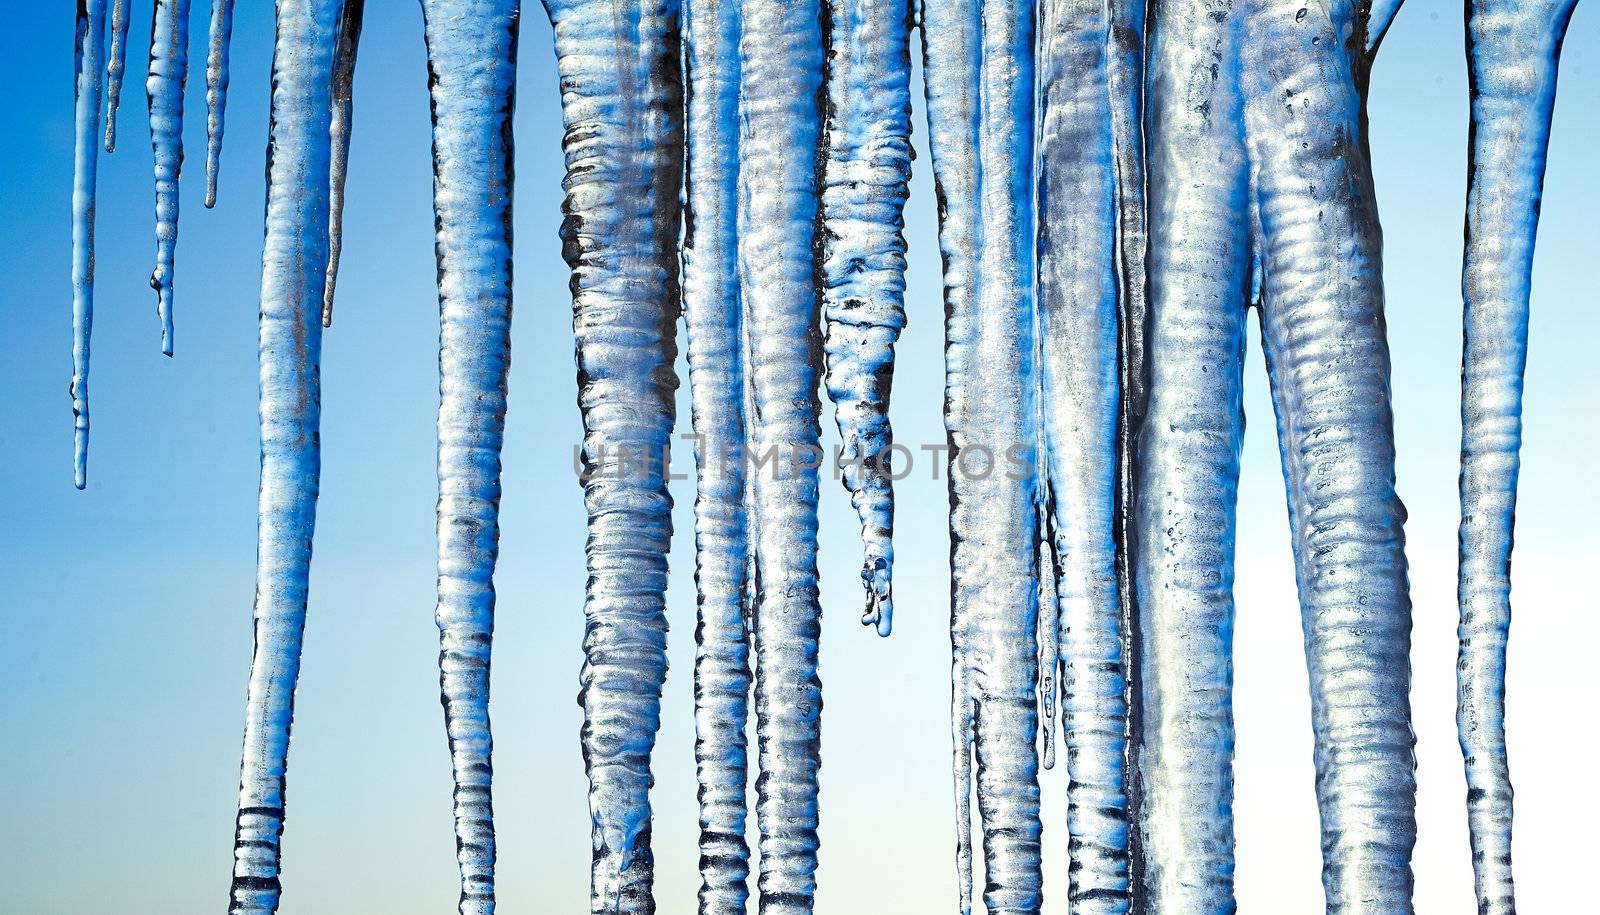 Frozen Long Icicles Isolated on Blue Sky Background